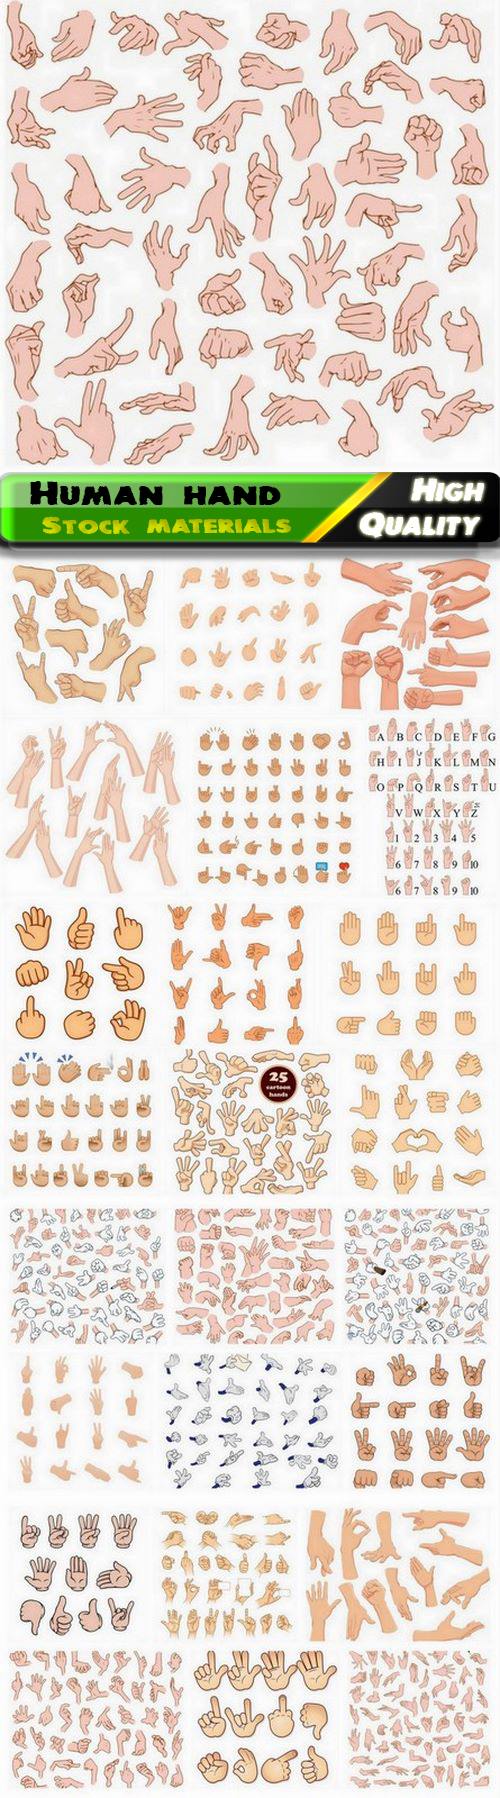 Set of cartoon human hand with different gestures - 25 Eps